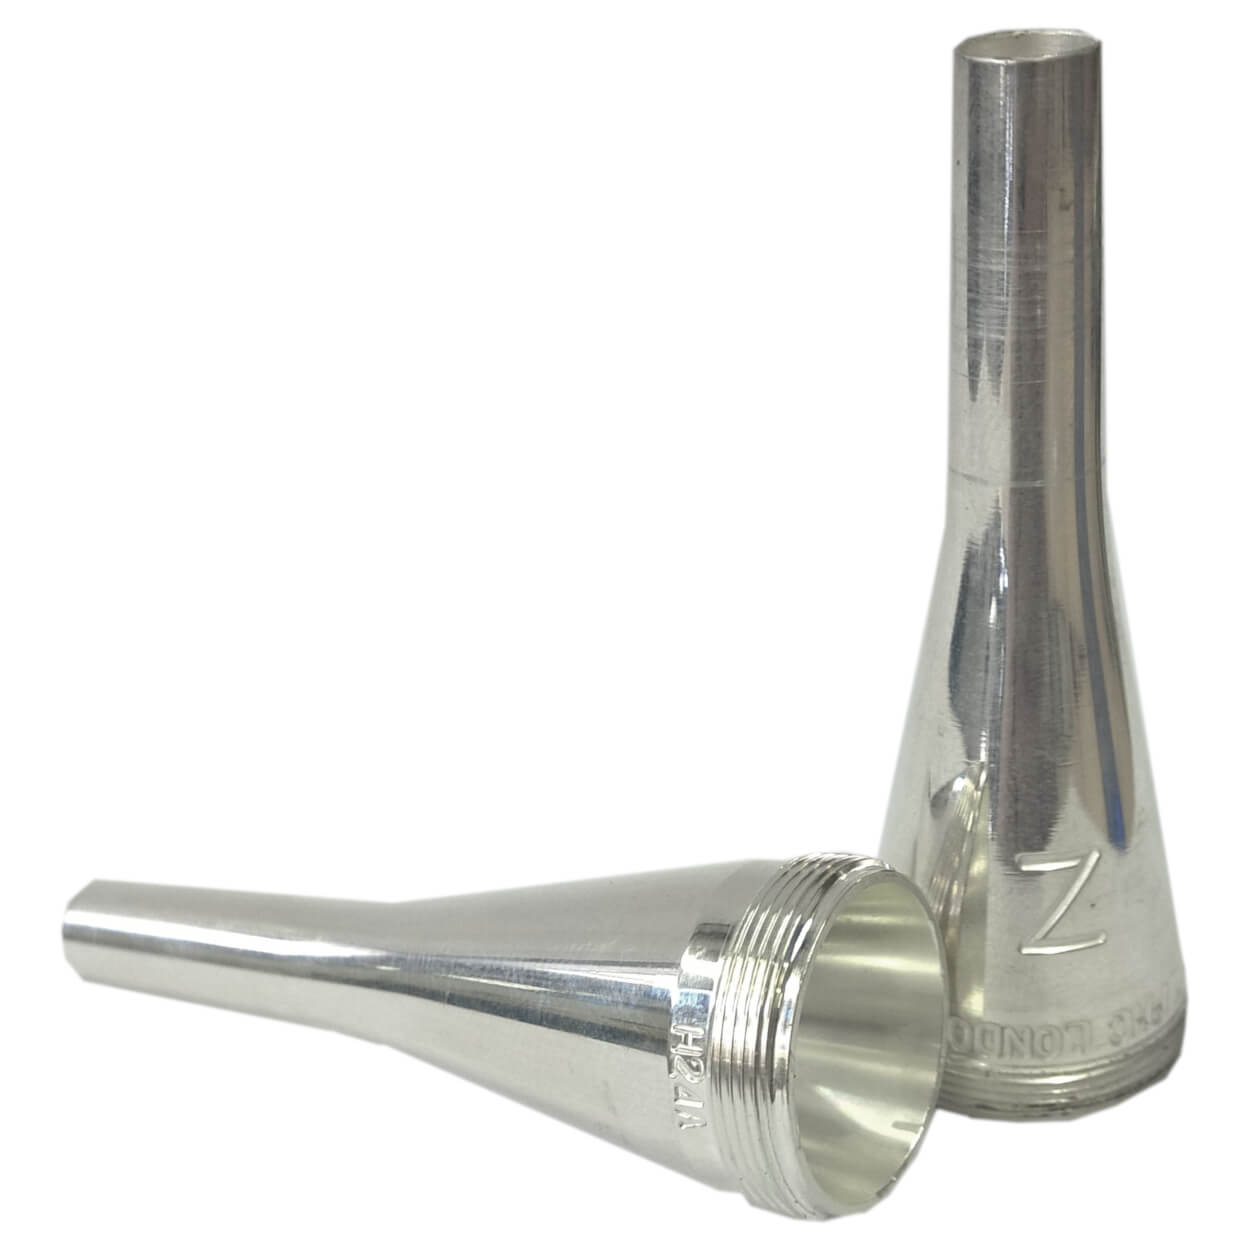 Mouthpiece for french horn K-Series exclusive (various models